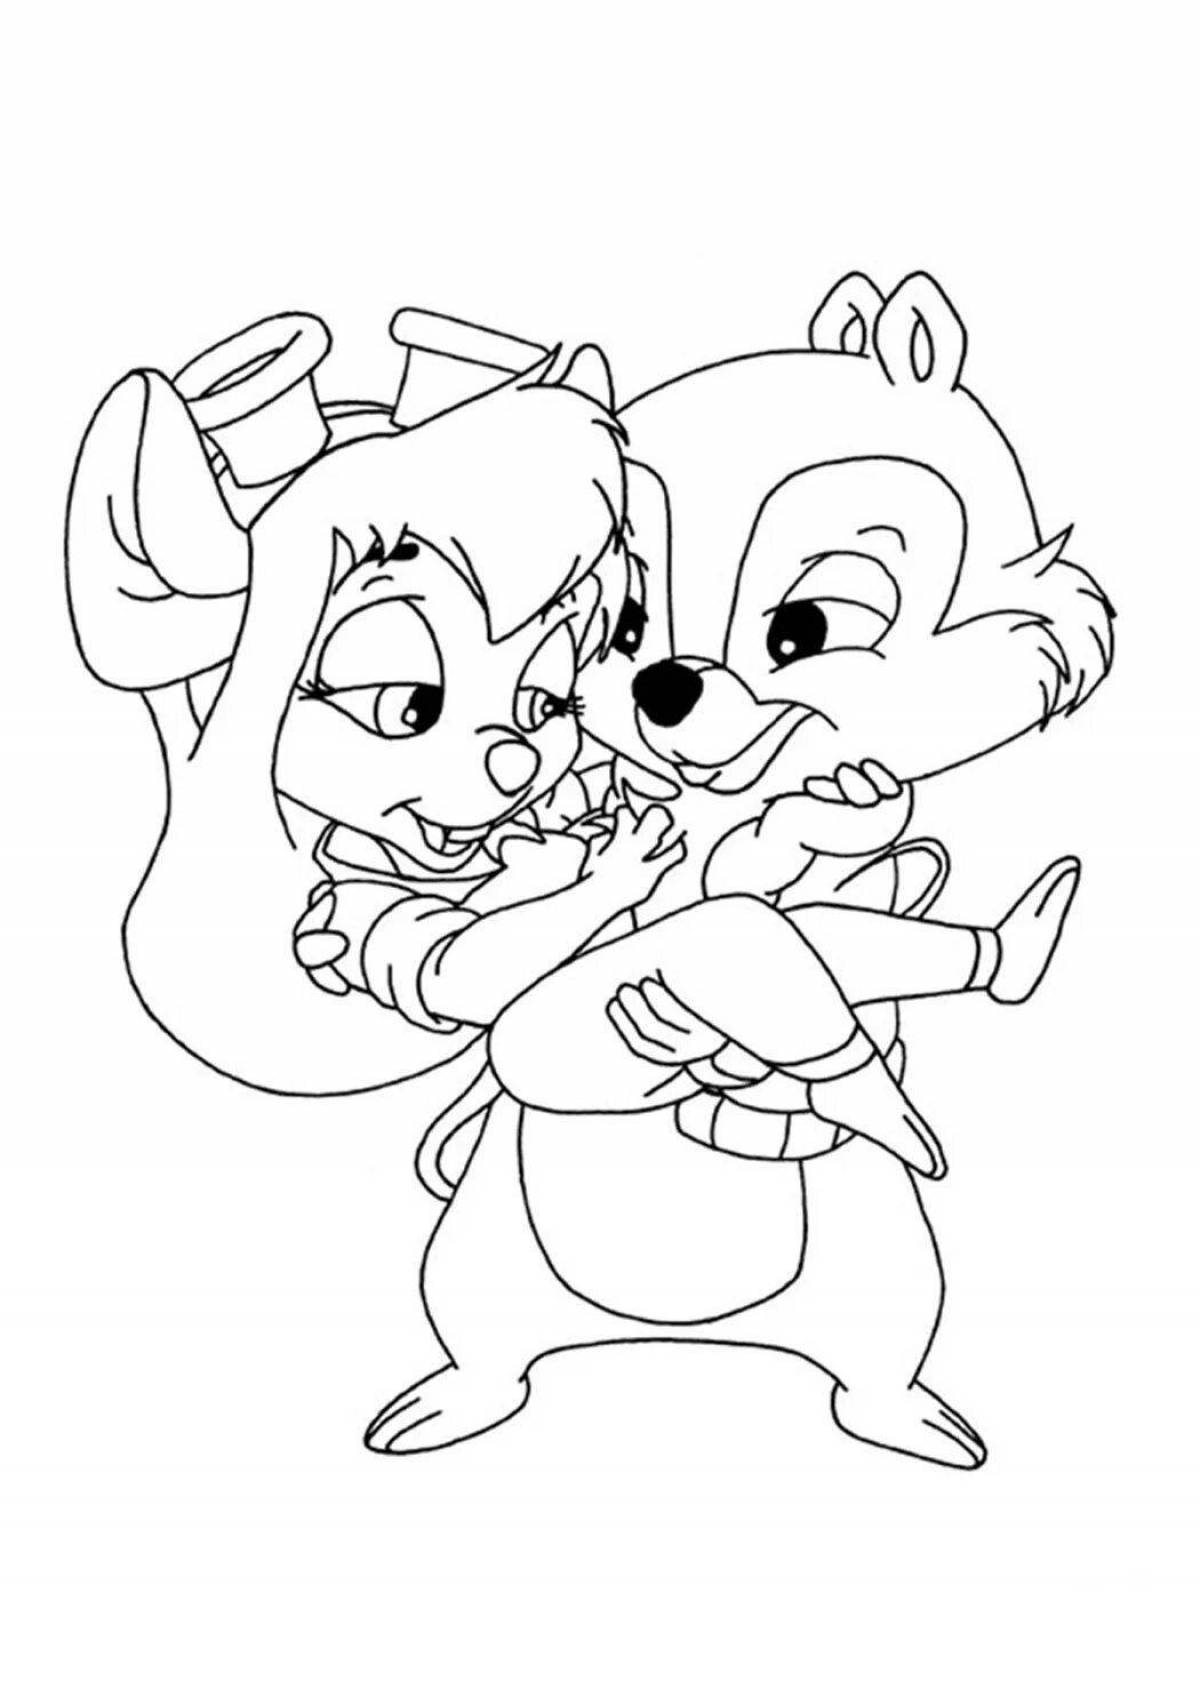 Chip and Dale fun coloring pages for kids